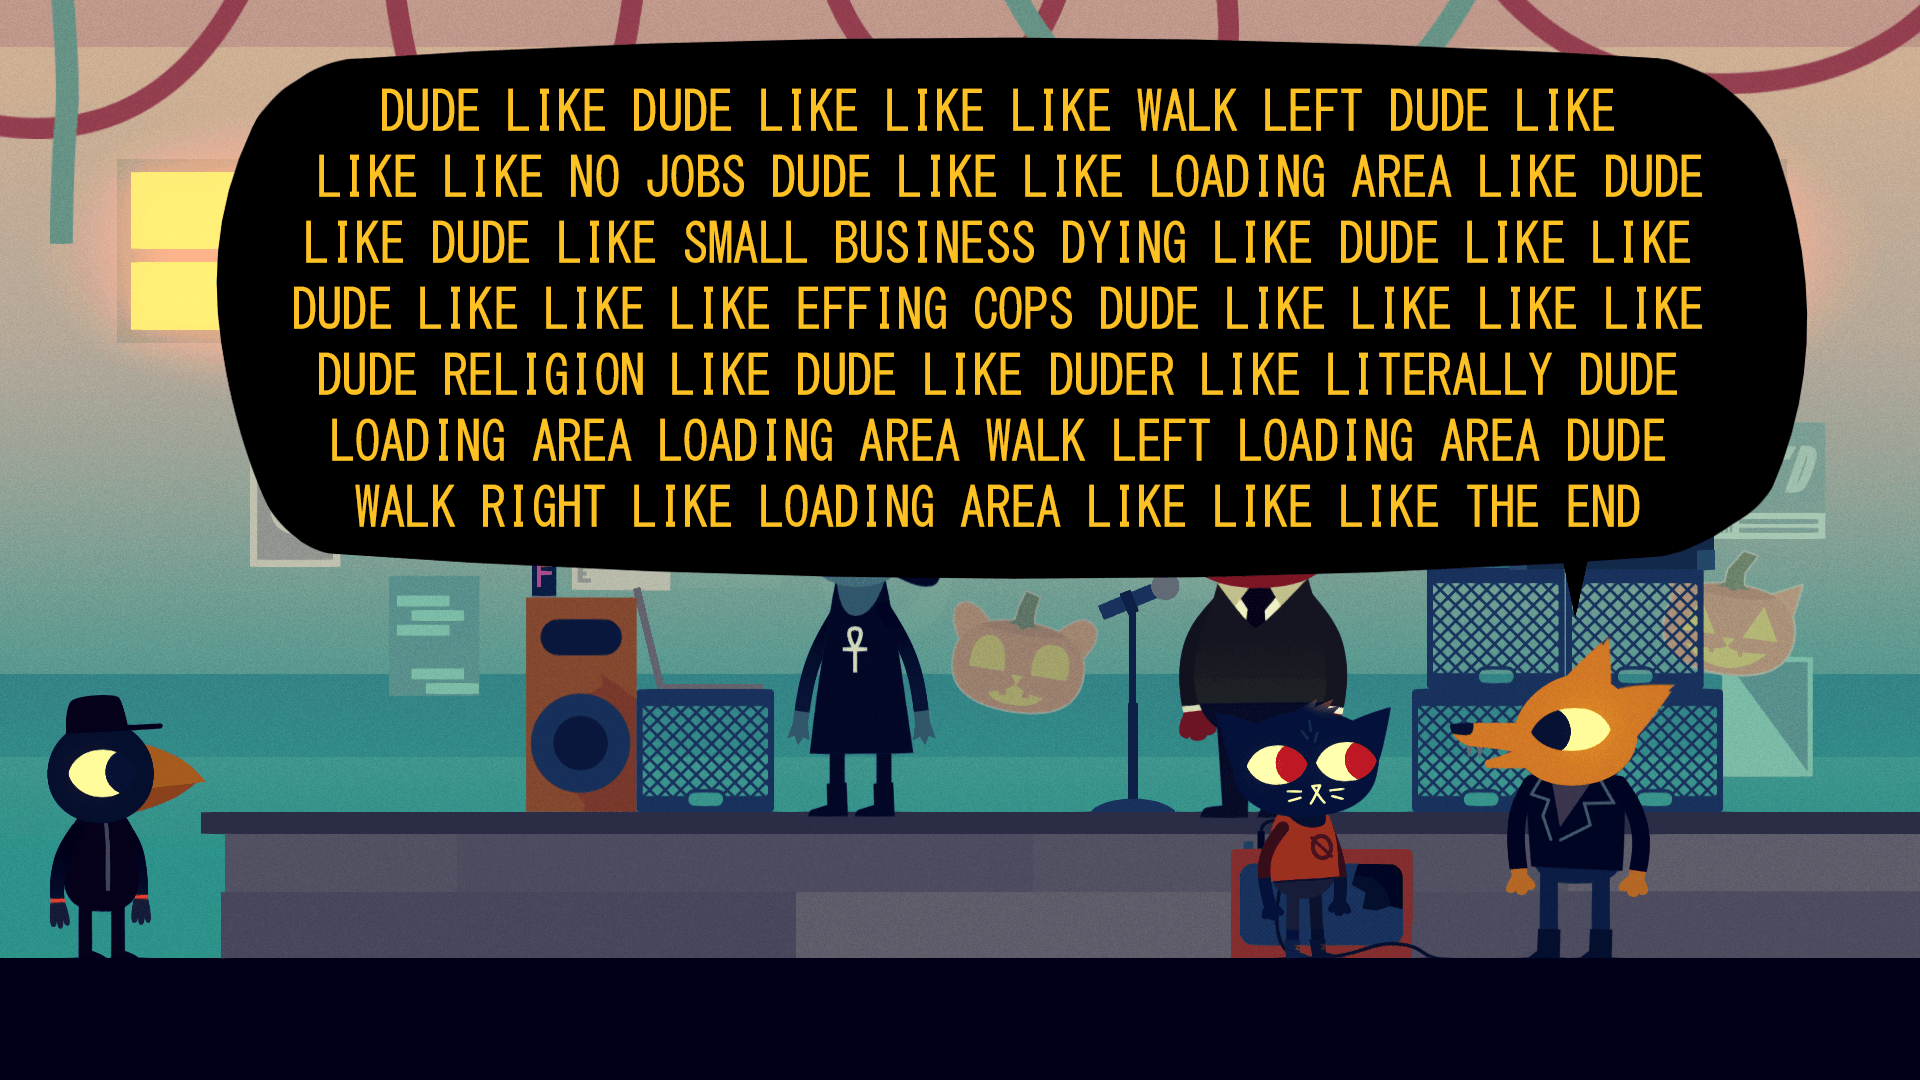 the sorty of night in the woods